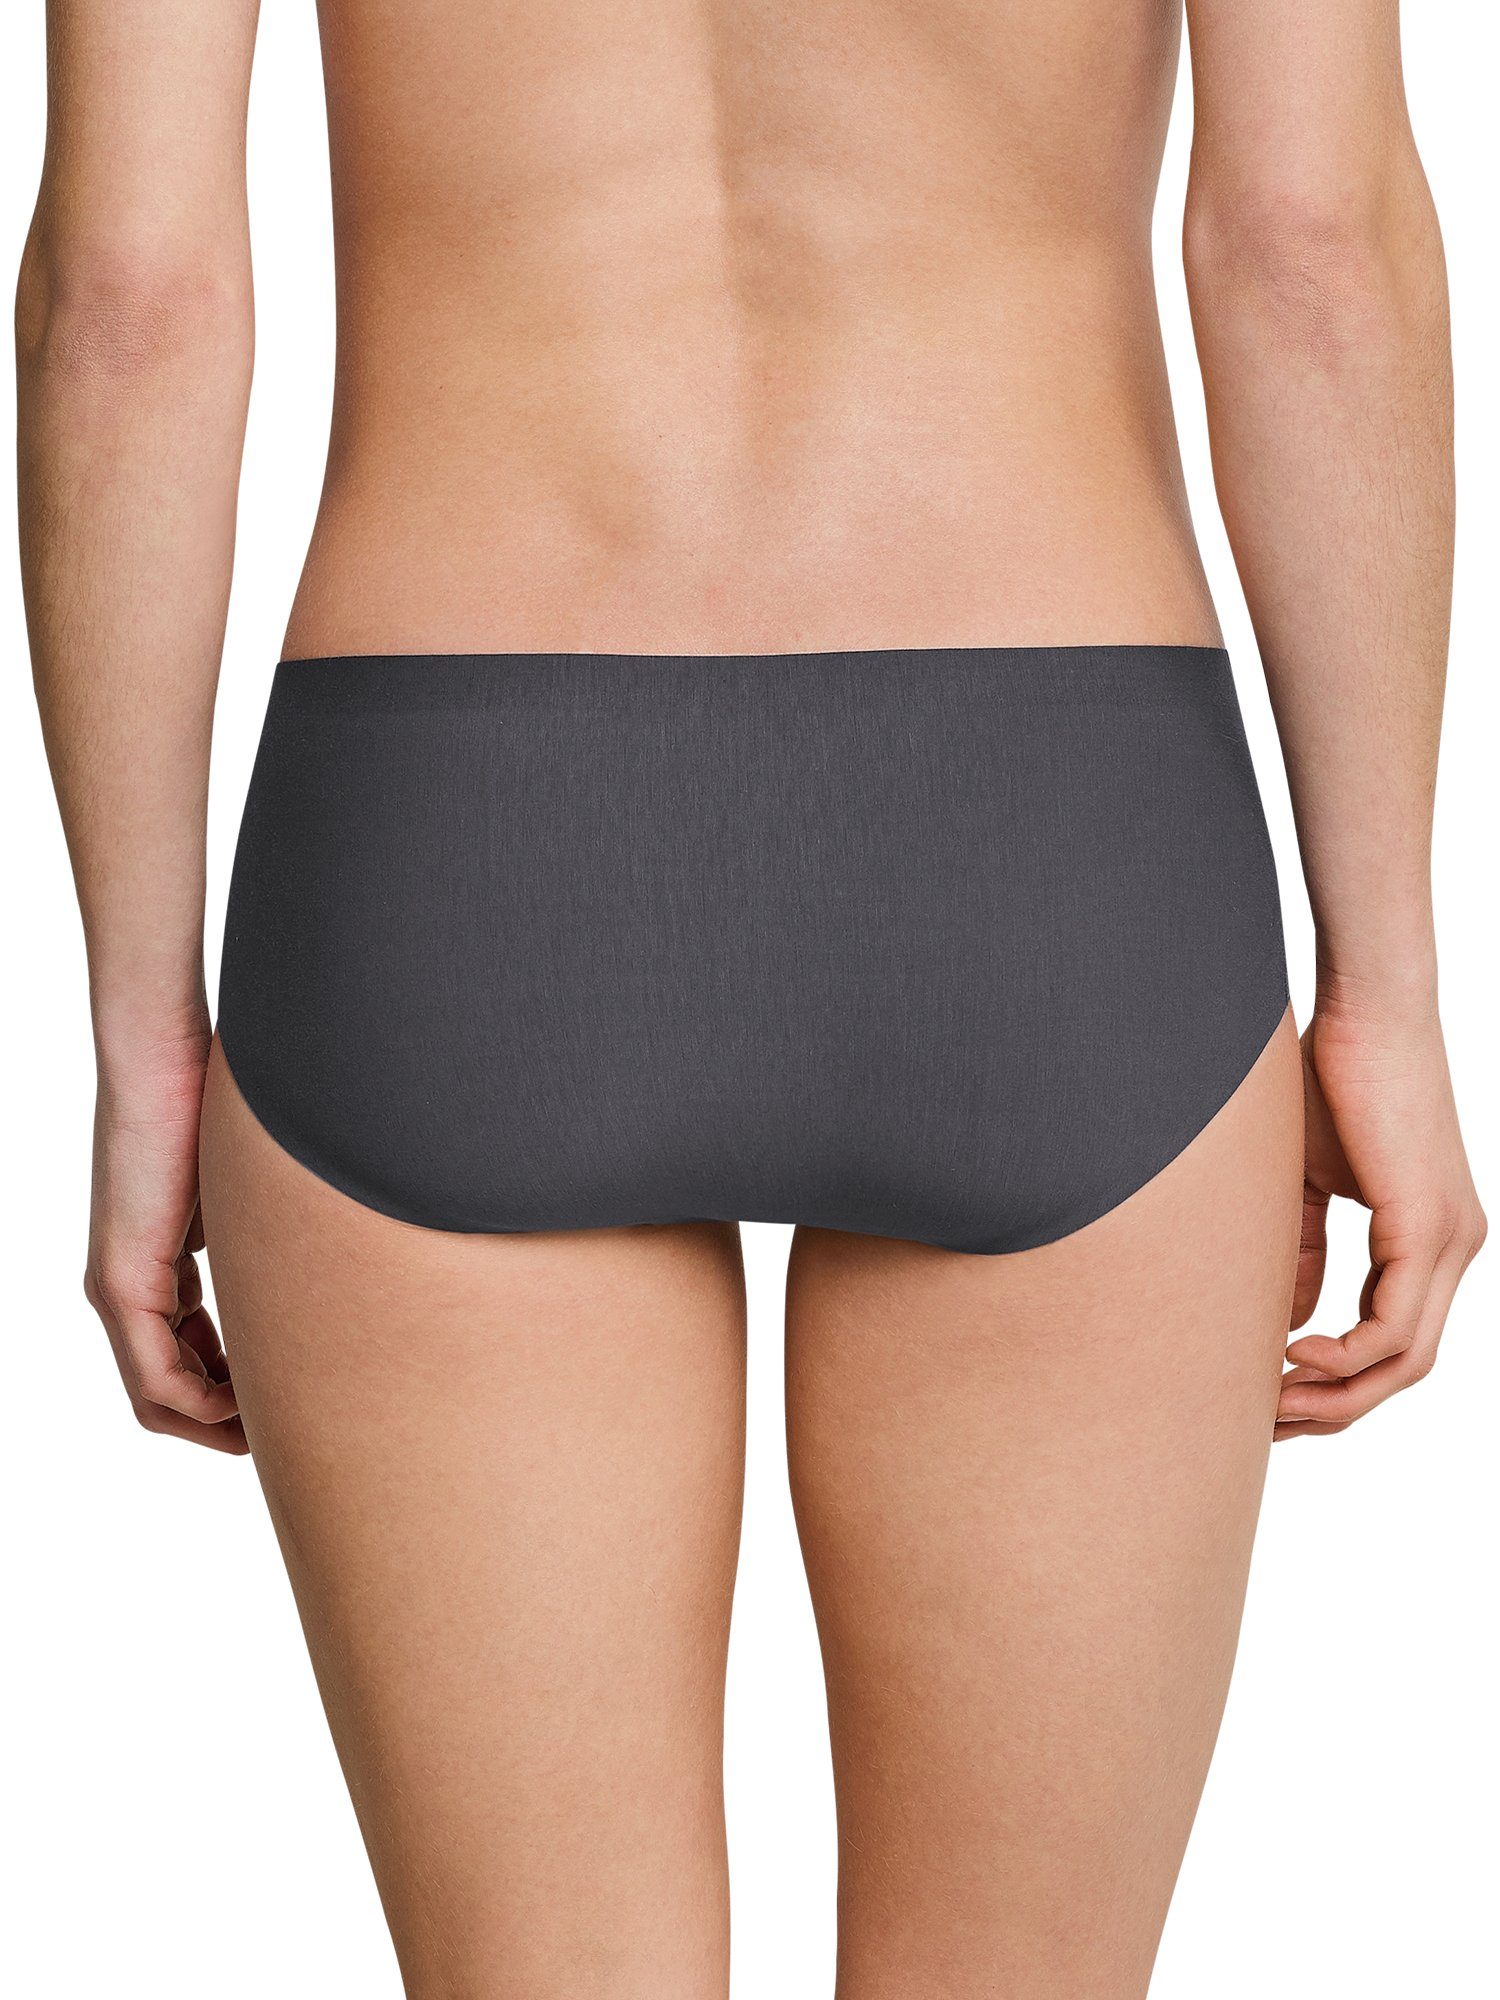 (1-St) Invisible Panty Schiesser sand Cotton